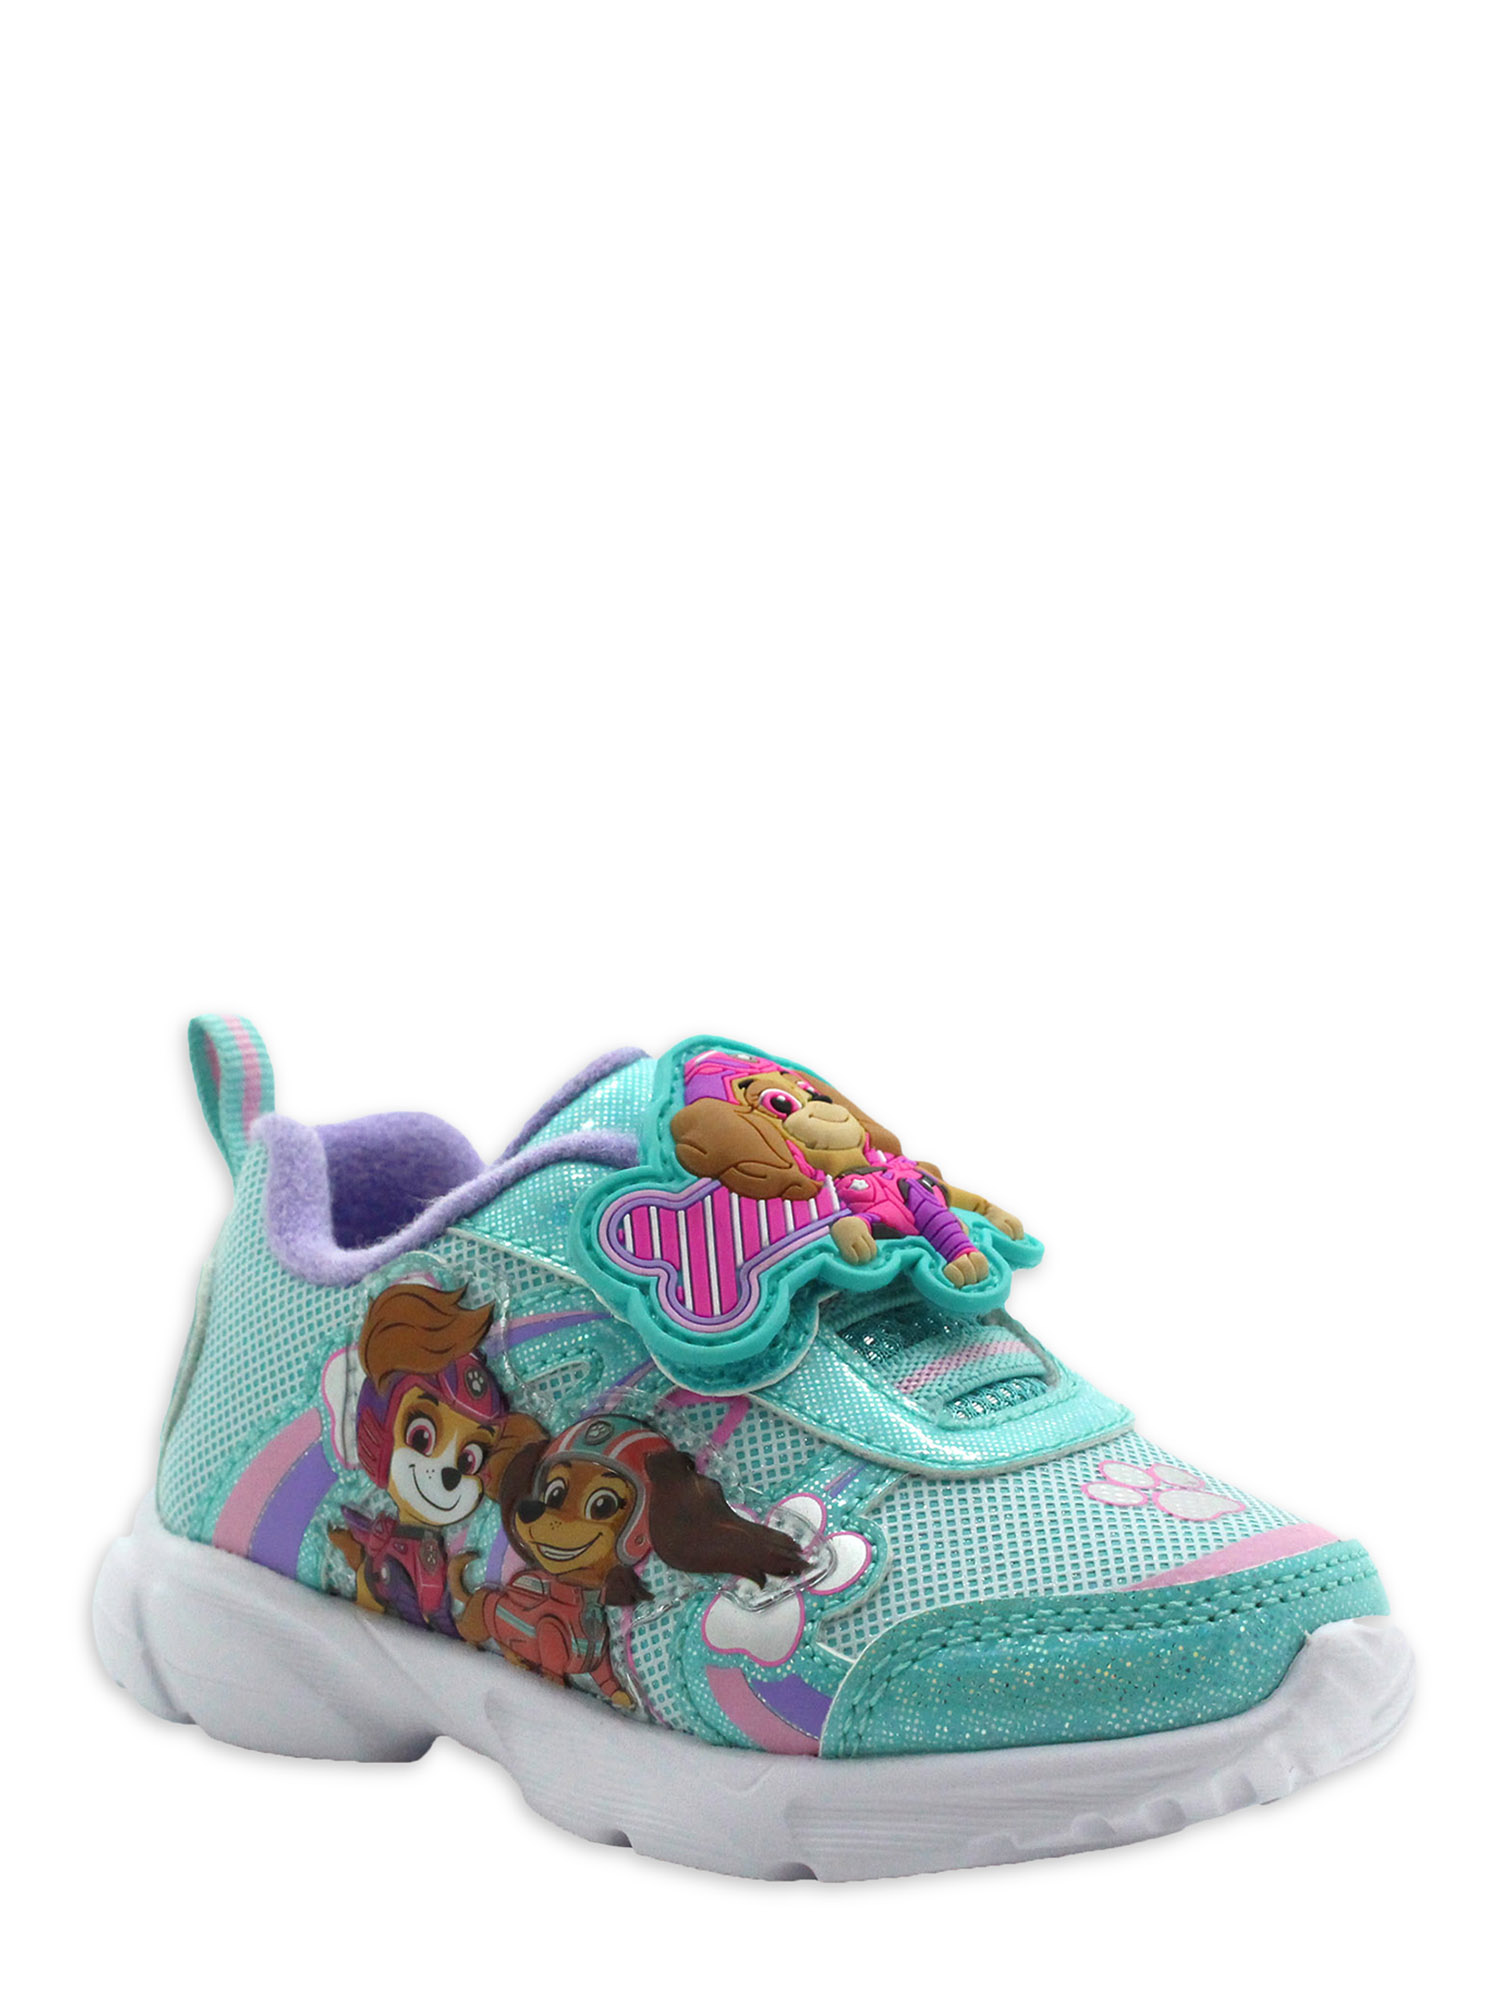 edv0d2v266 Kids LED Light Up Shoes Boy and Girls Colorful Sneakers